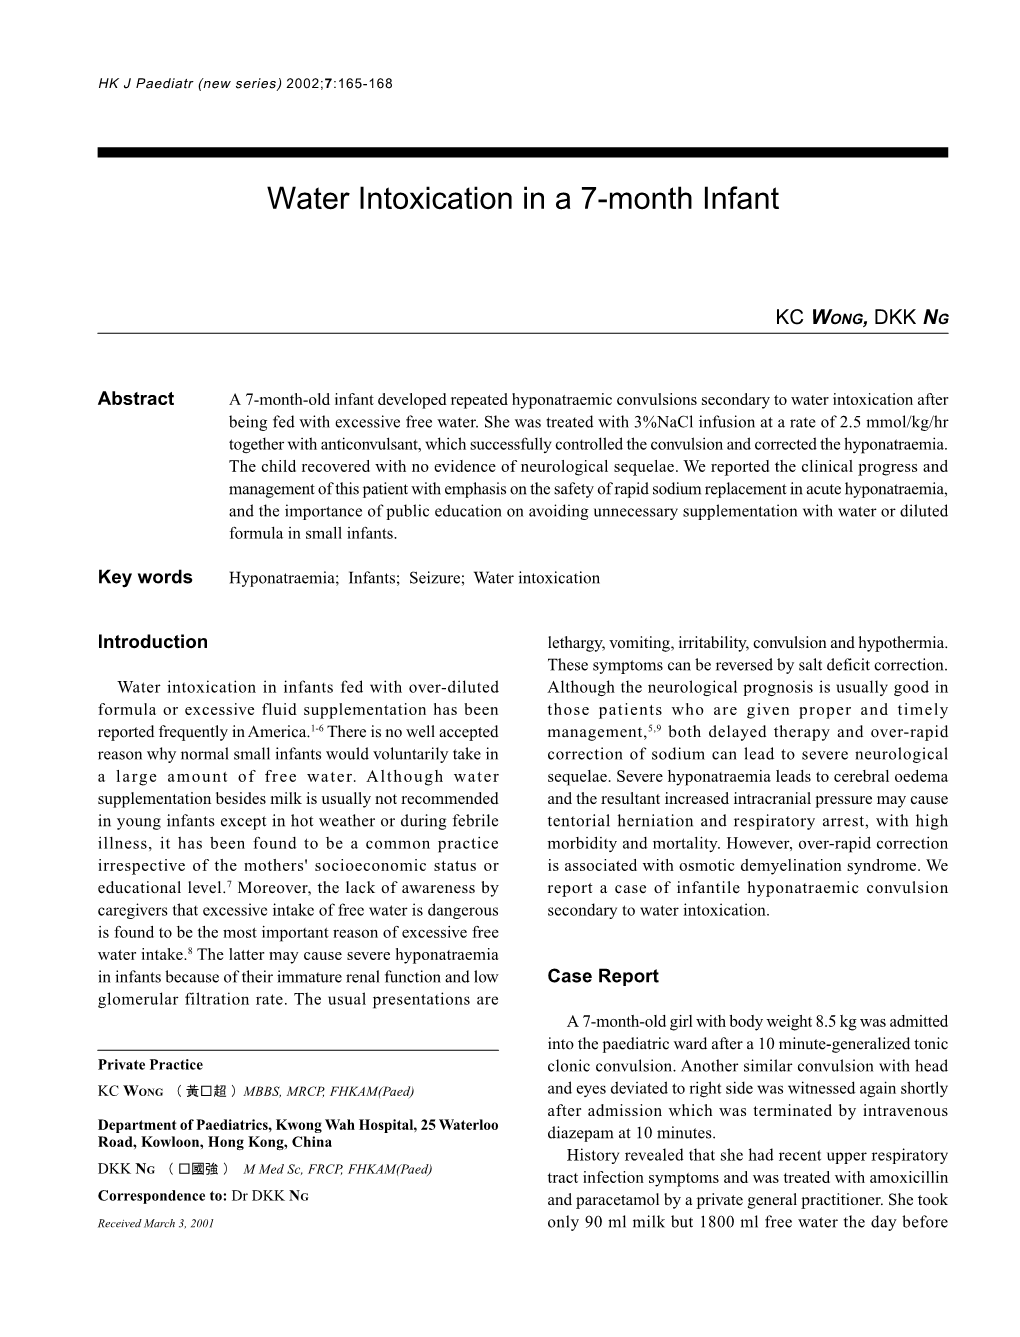 Water Intoxication in a 7-Month Infant